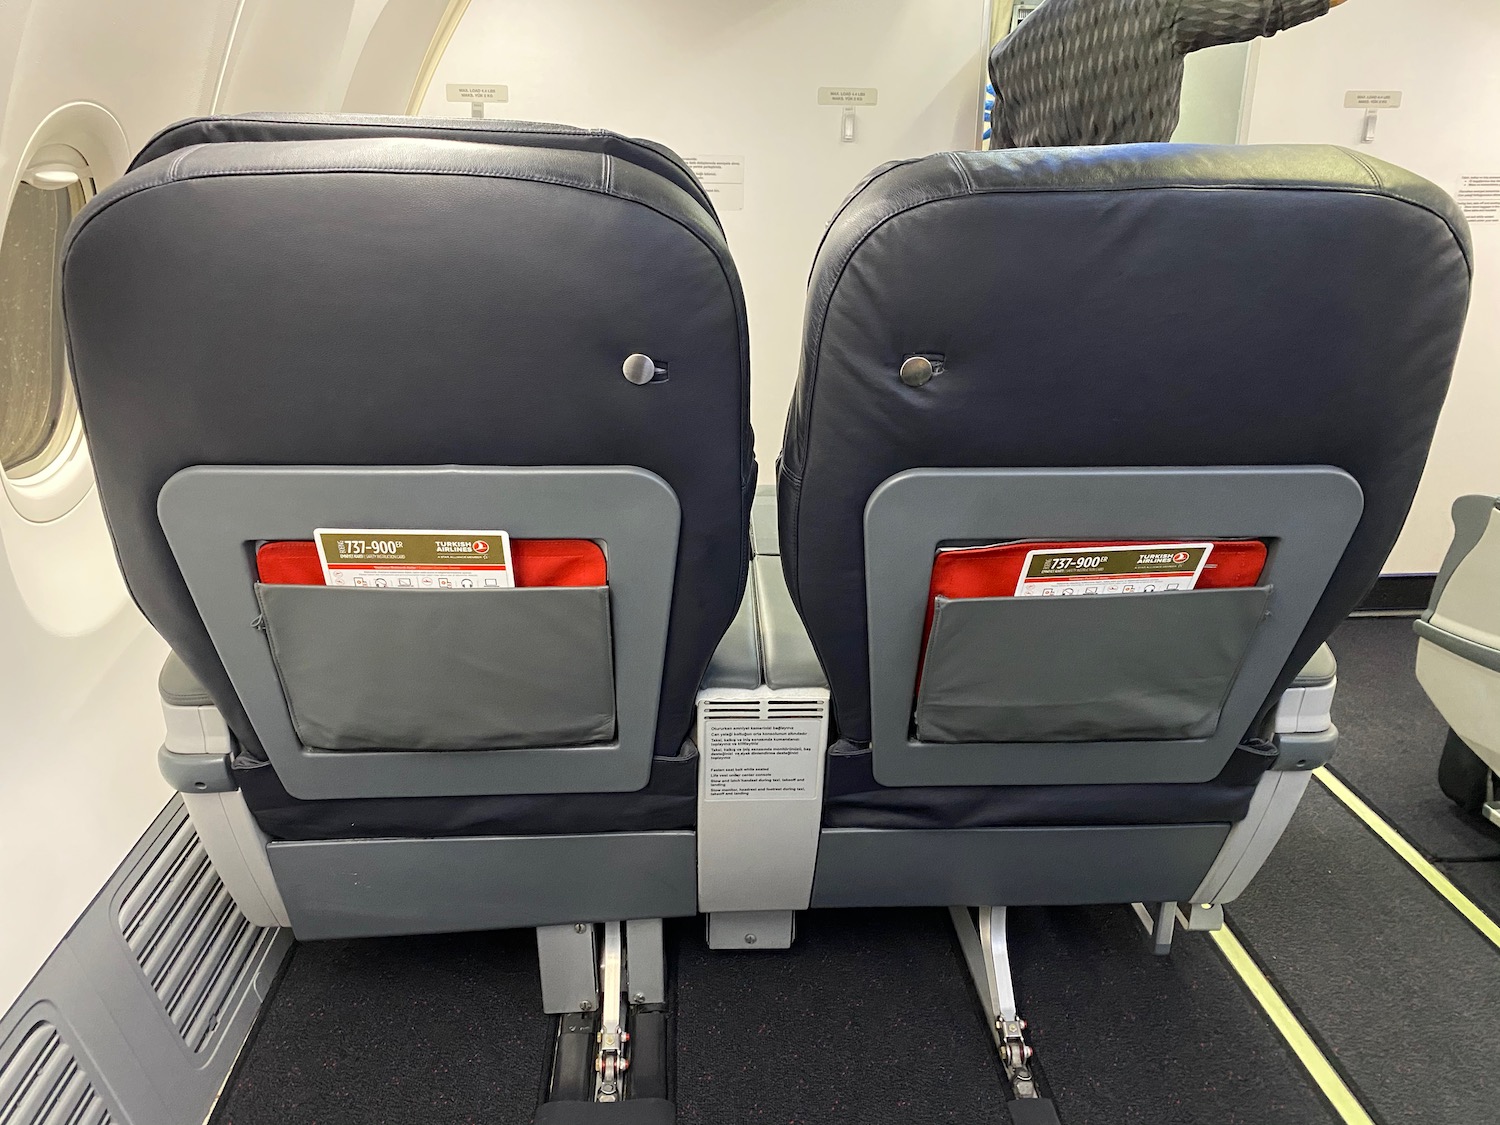 Turkish Airlines 737-900 Business Class Review